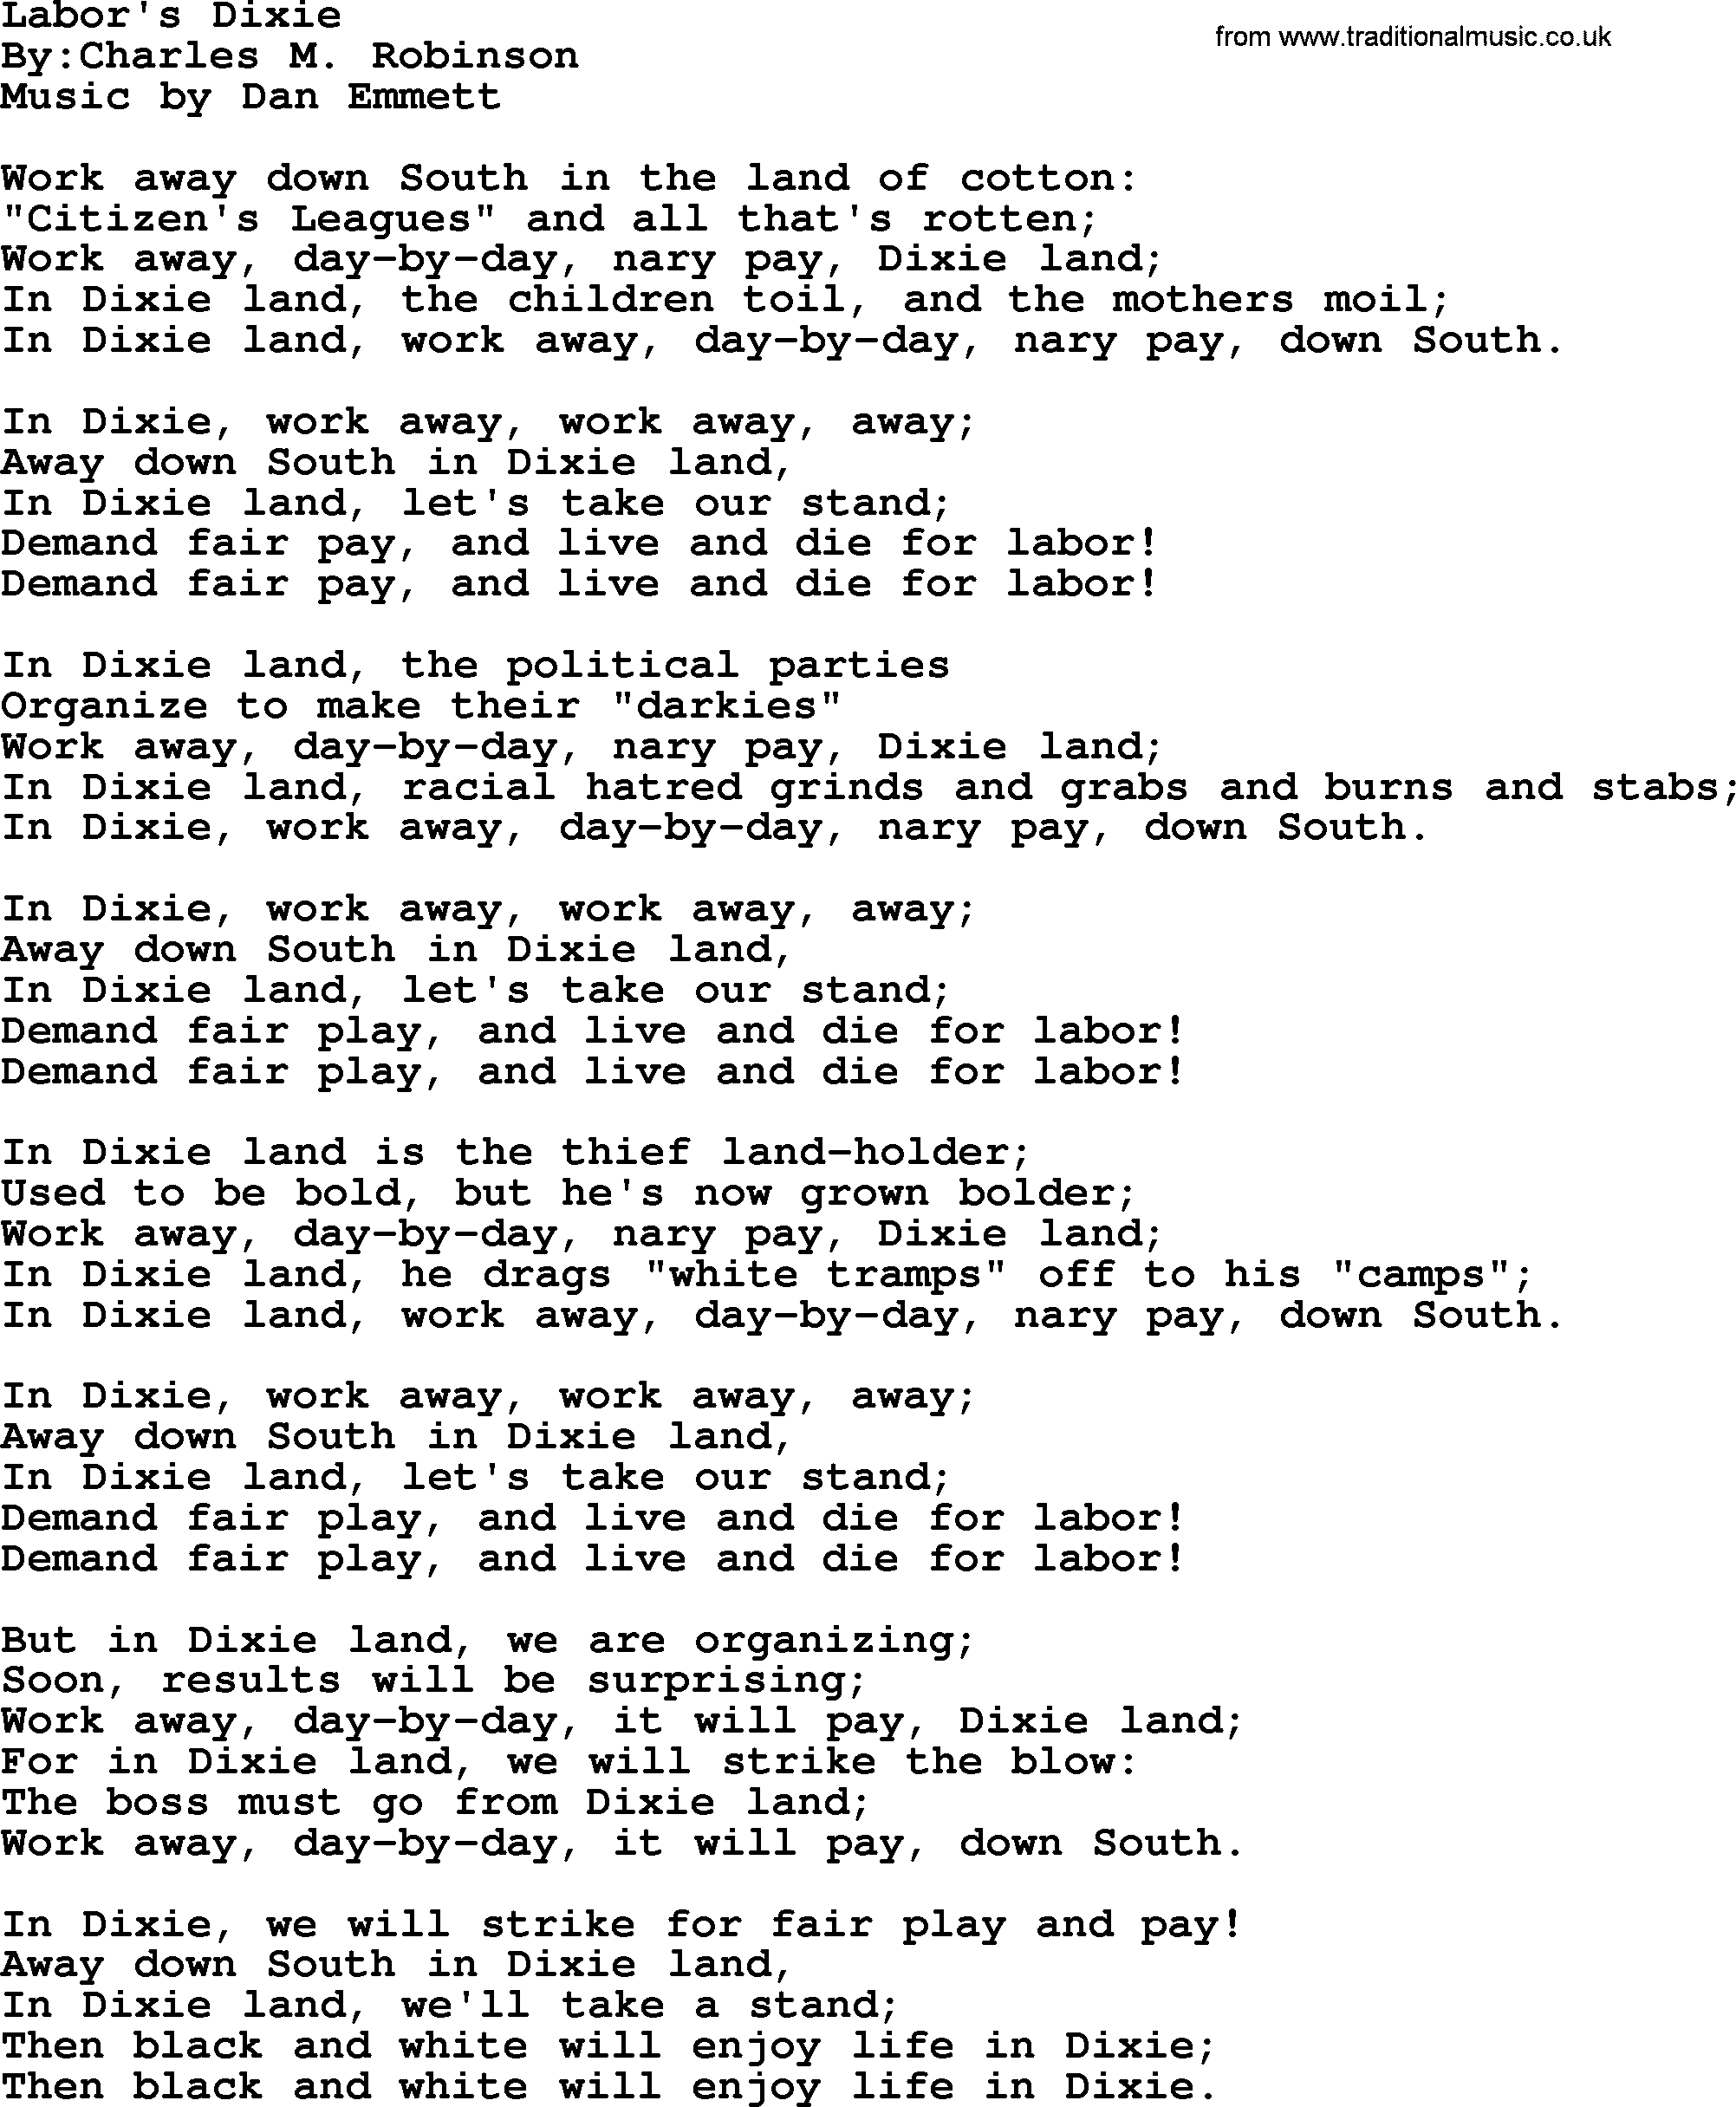 Political, Solidarity, Workers or Union song: Labors Dixie, lyrics